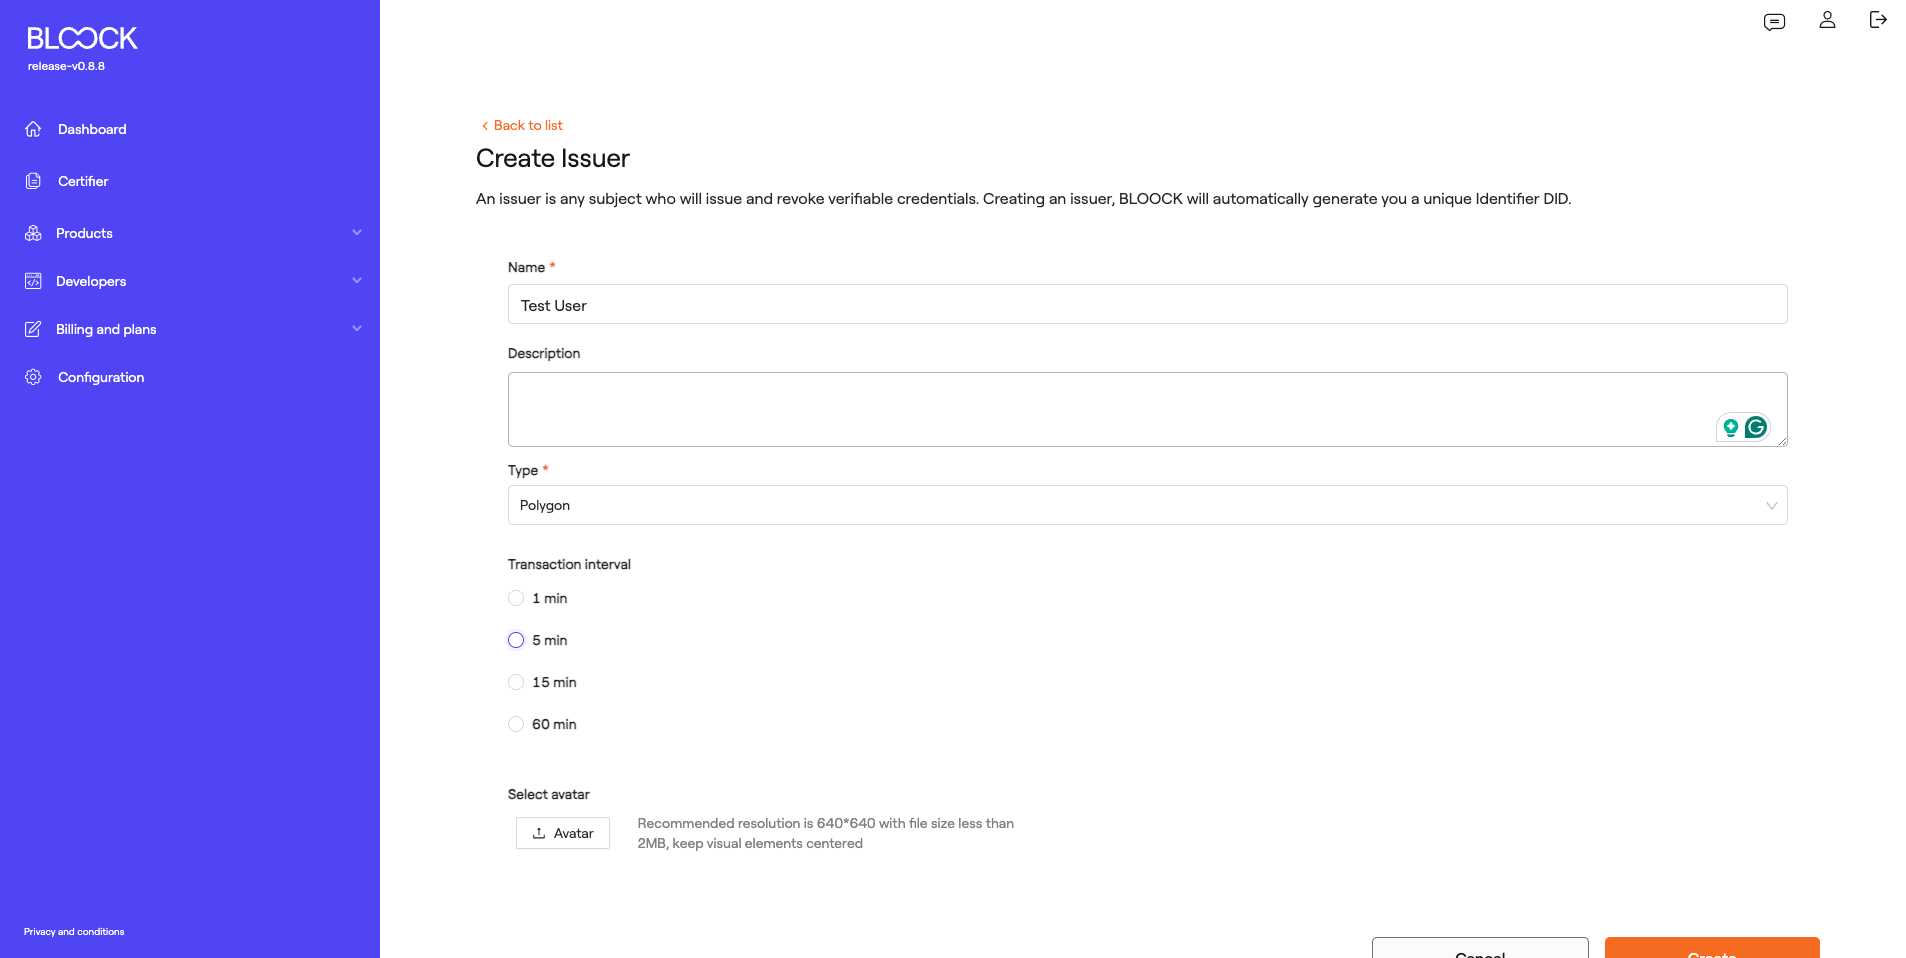 Create Issuer Form